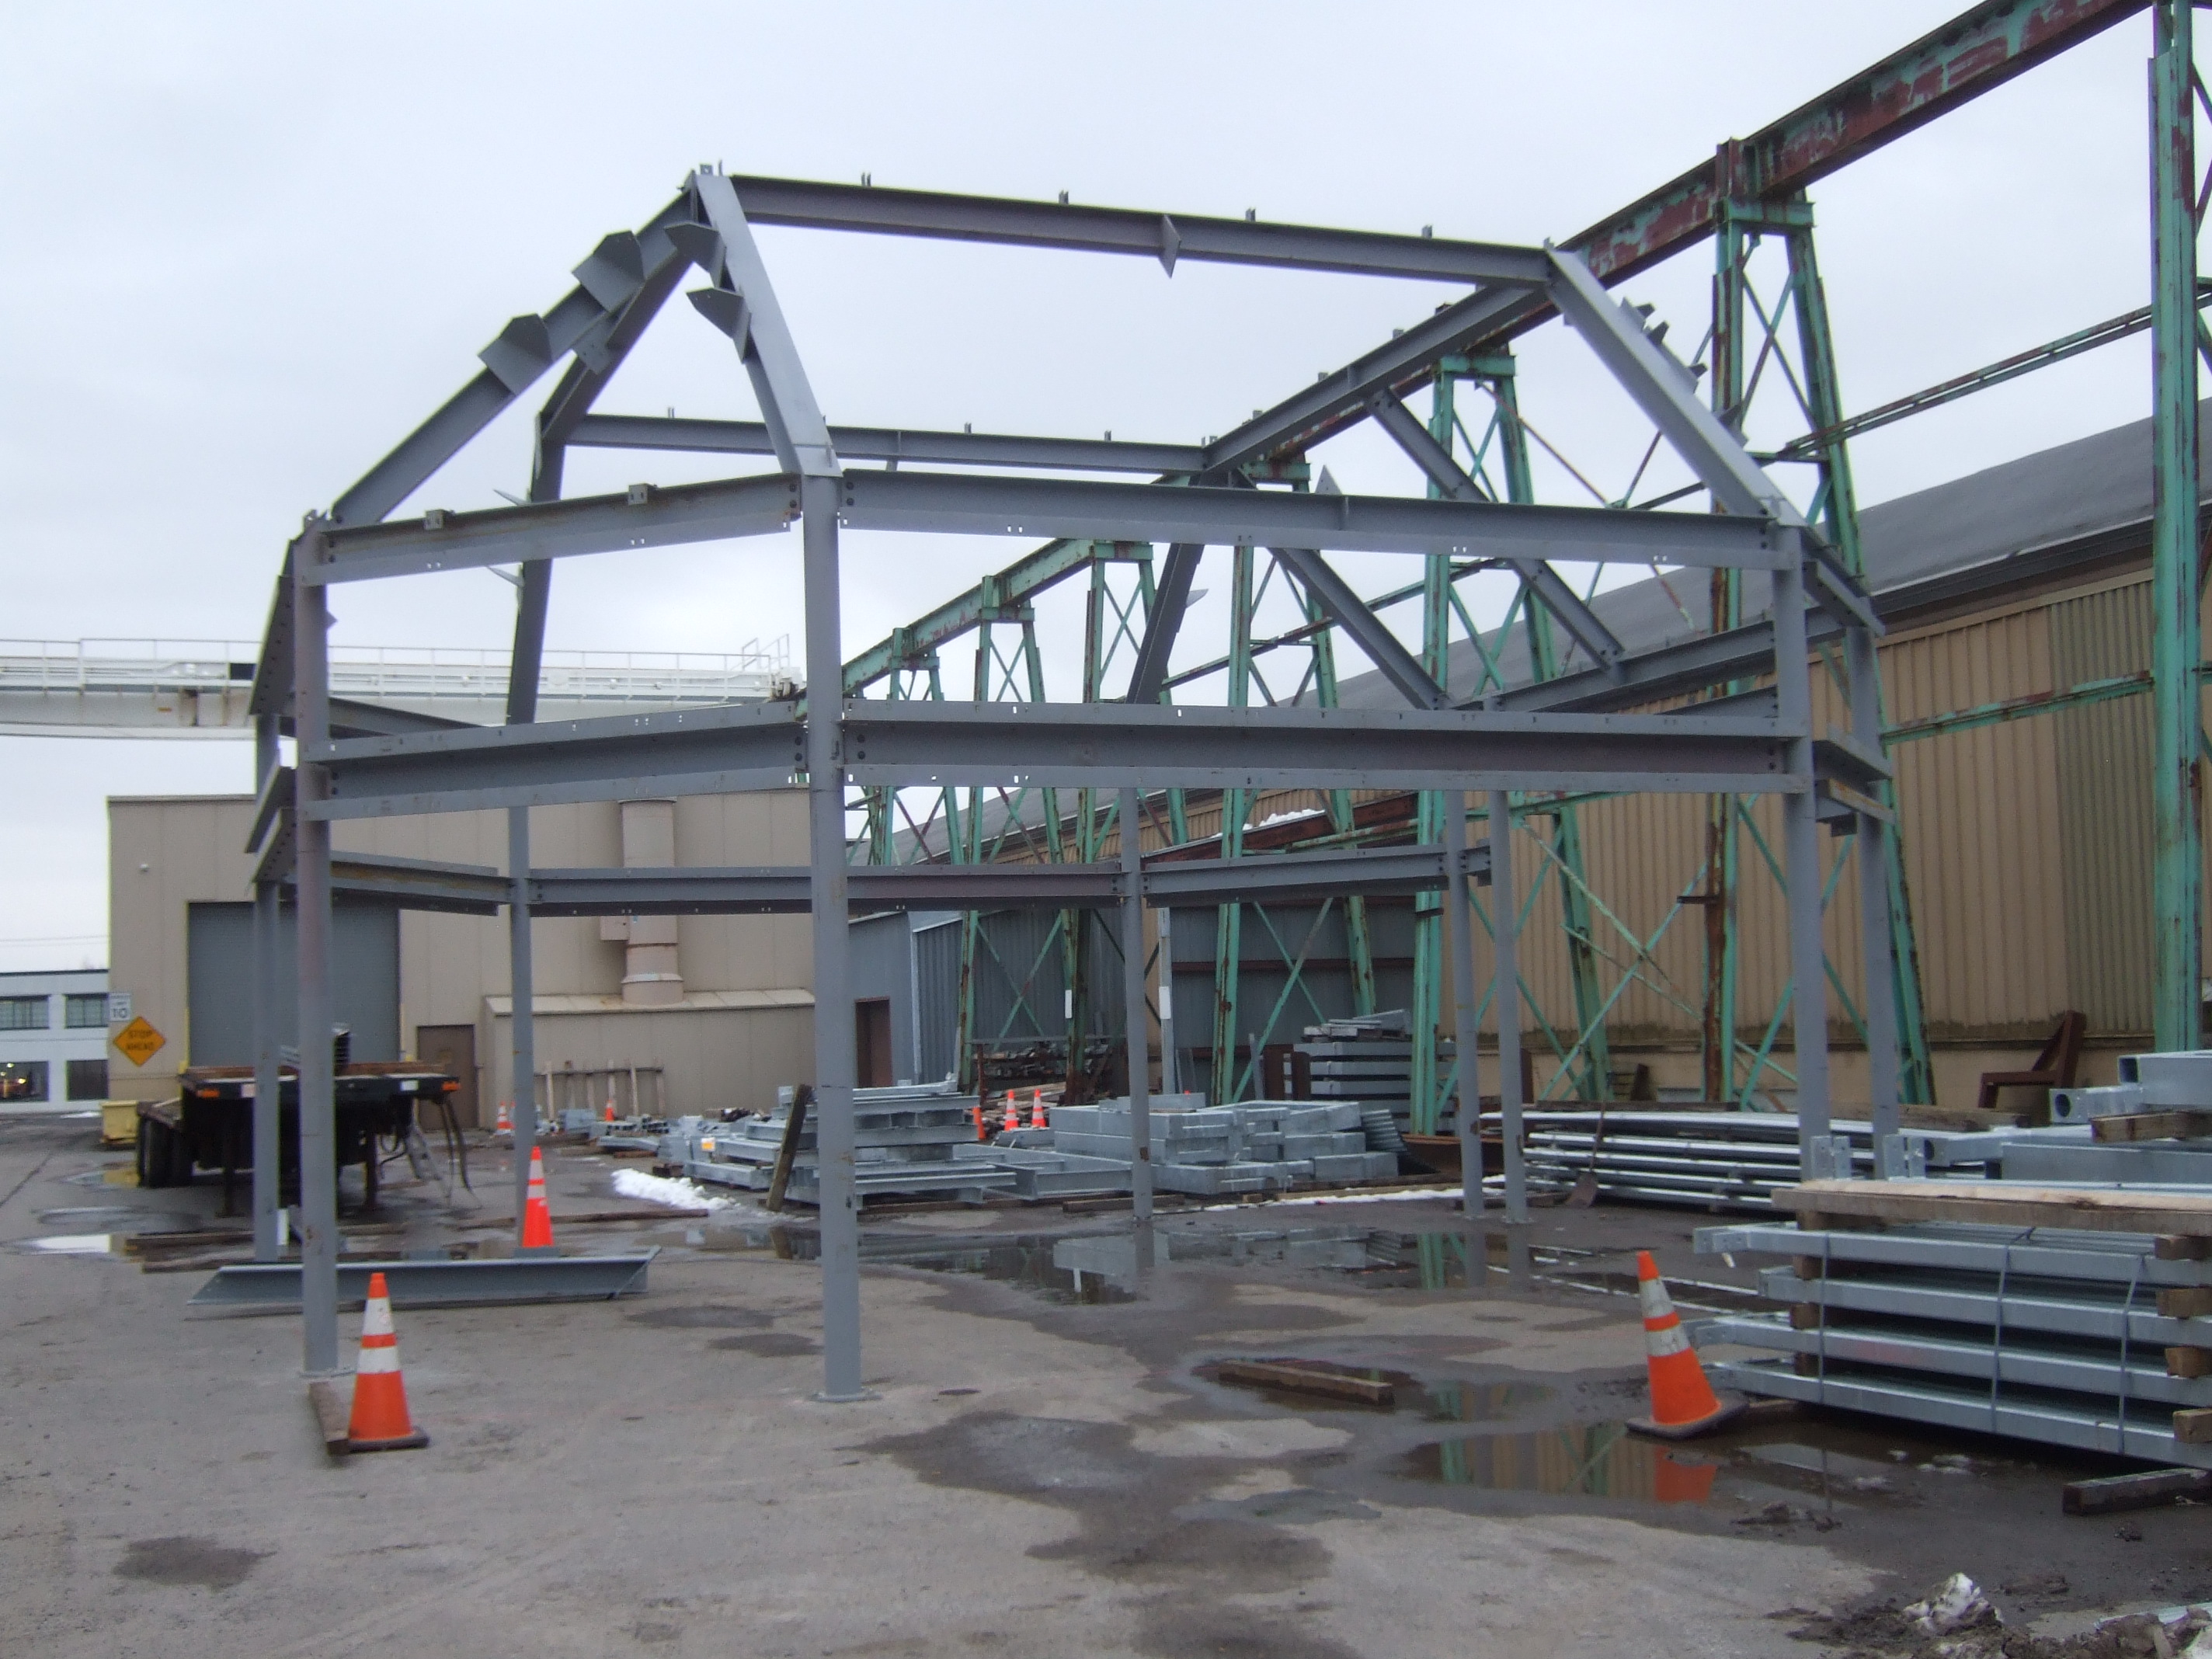 A large steal frame in an outdoor construction yard